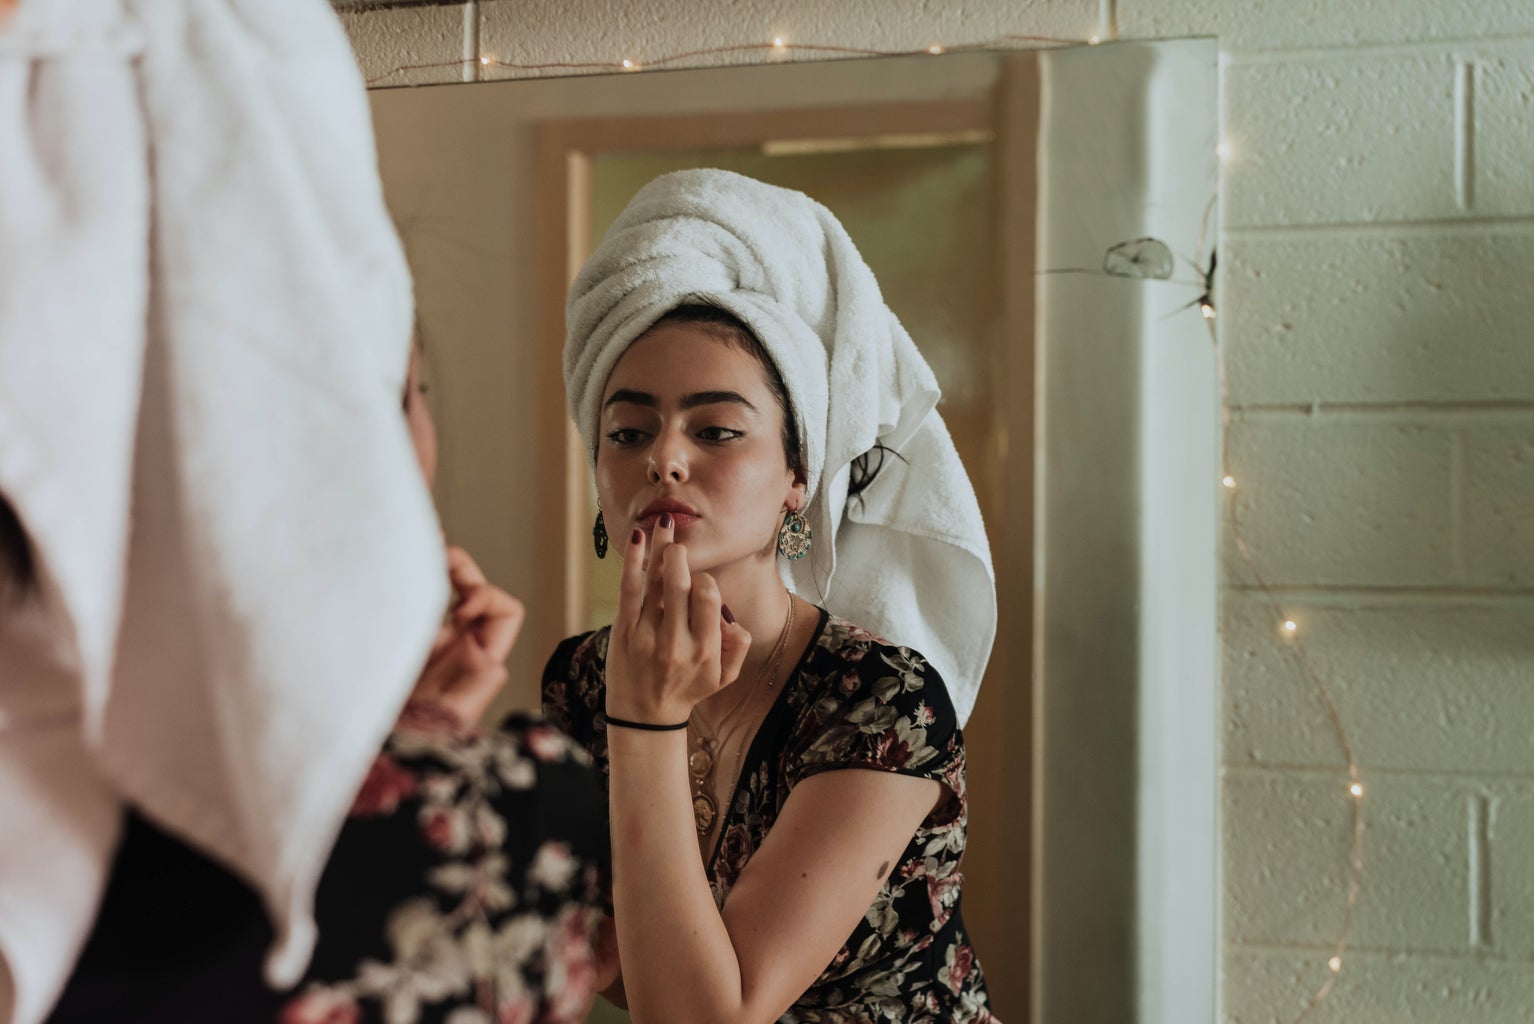 woman putting on makeup in front of mirror